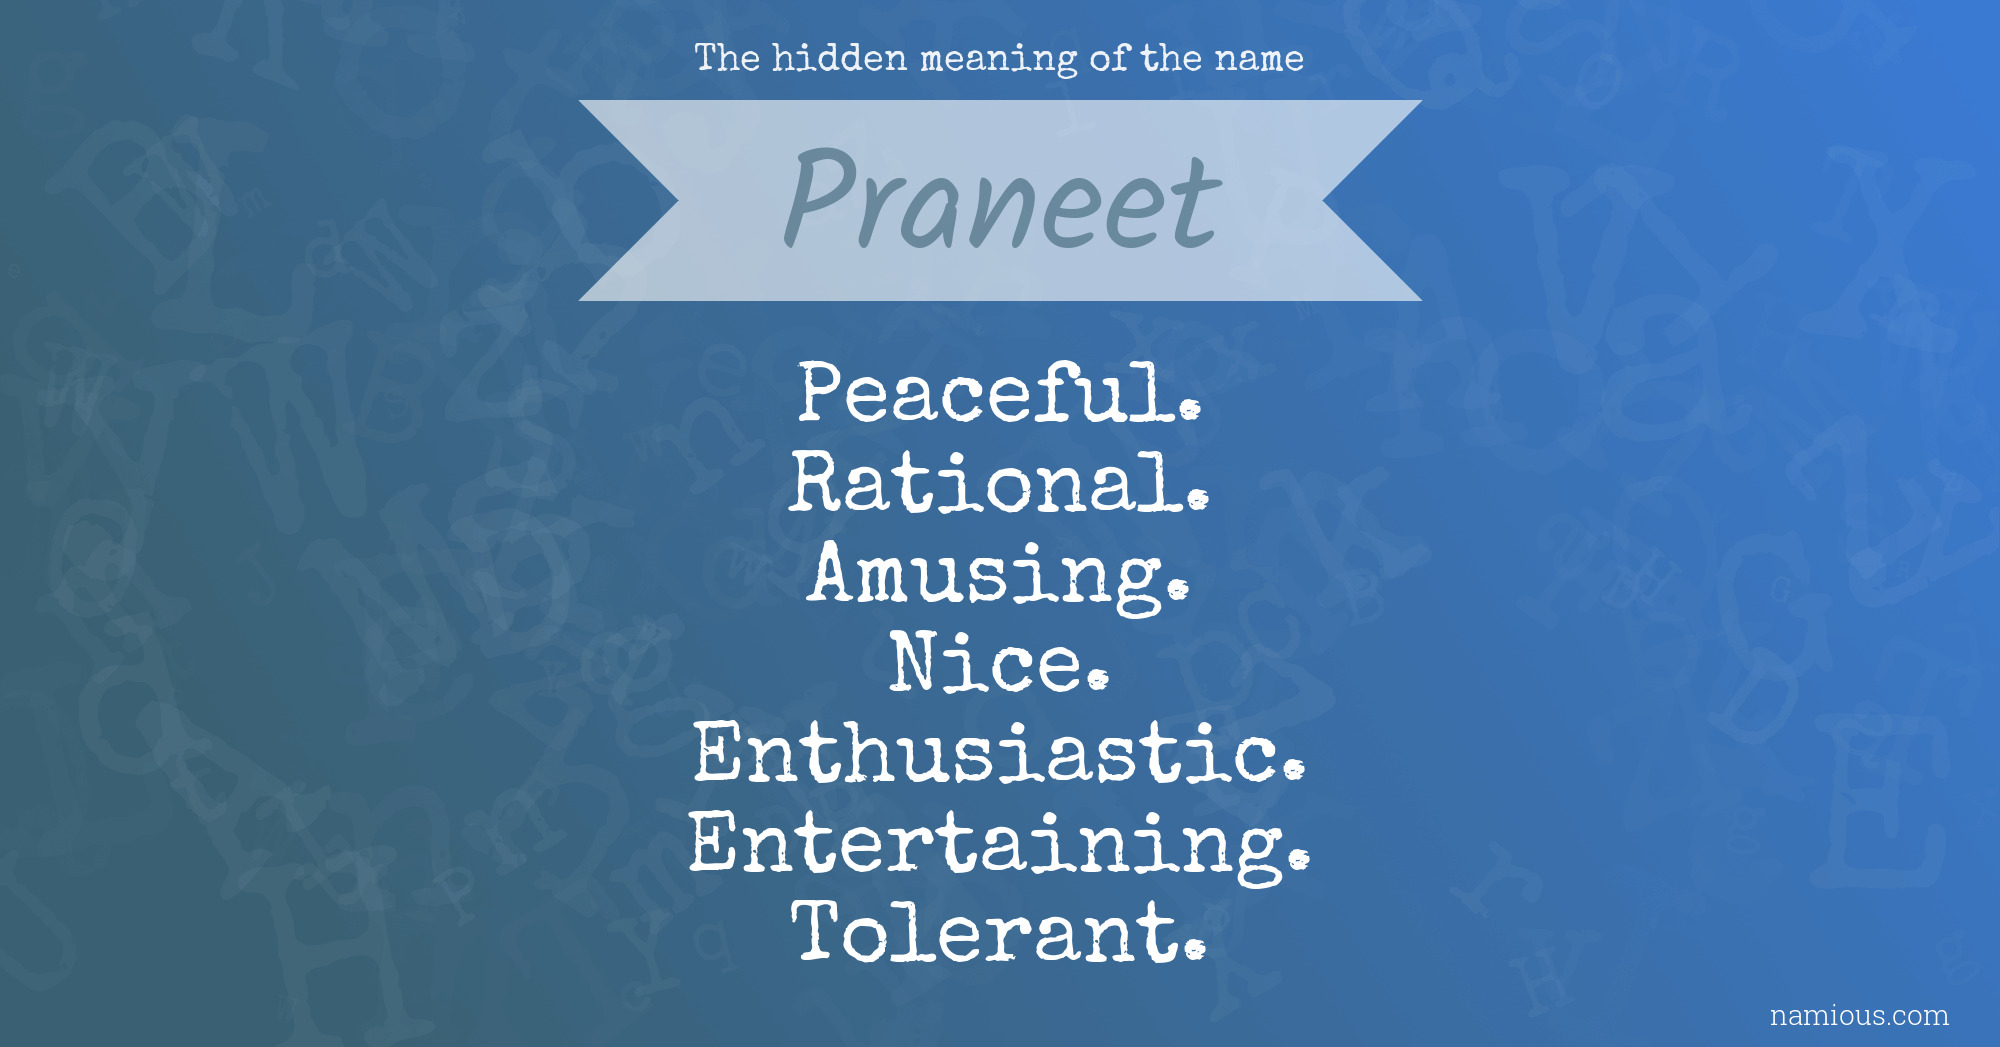 The hidden meaning of the name Praneet